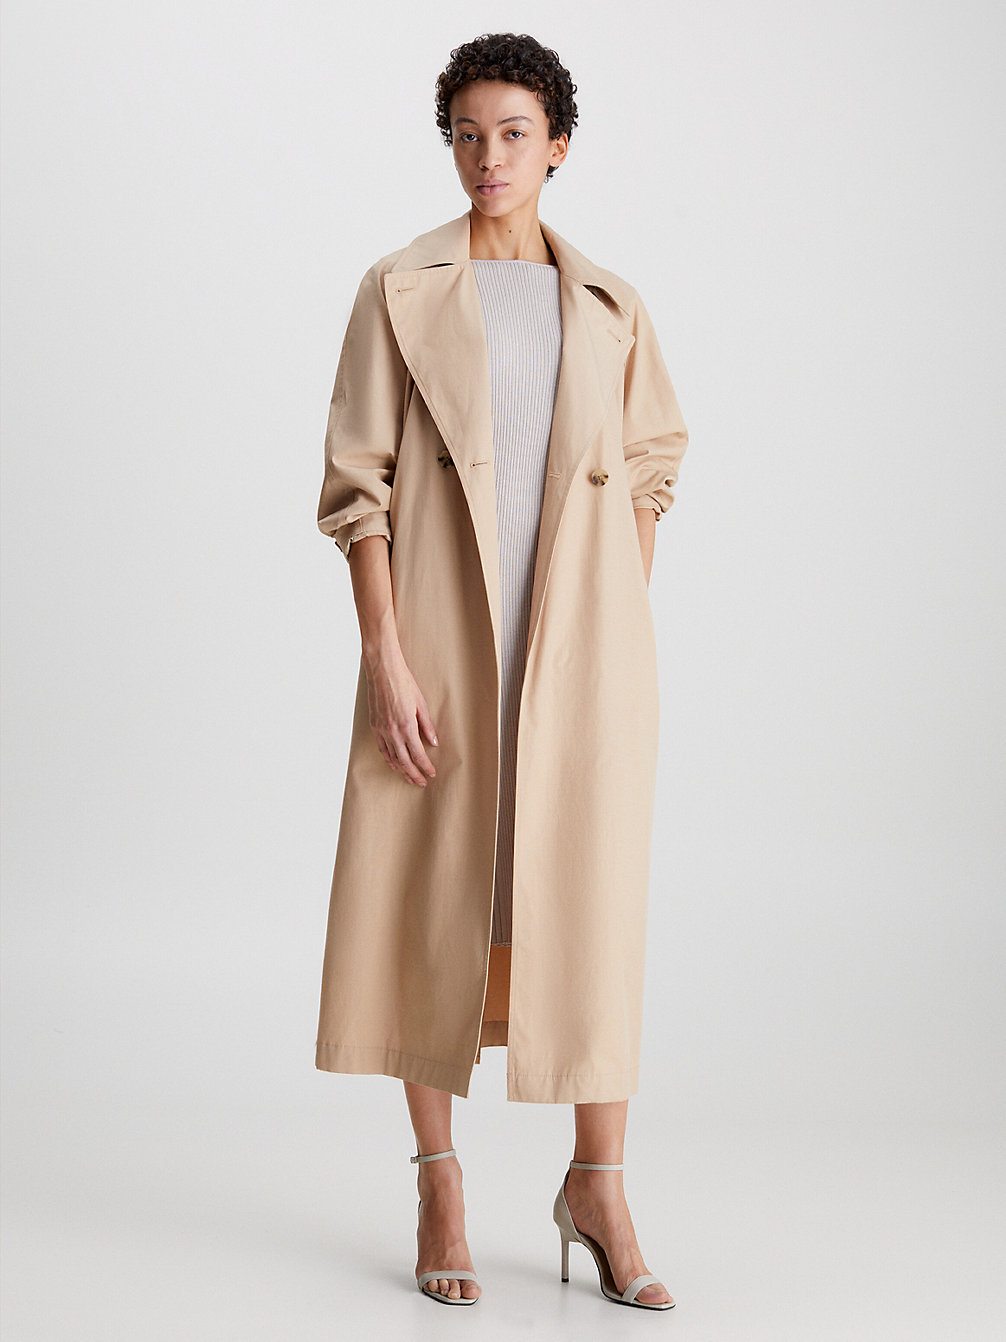 PASTEL SAND Oversized Cut Out Trench Coat undefined women Calvin Klein